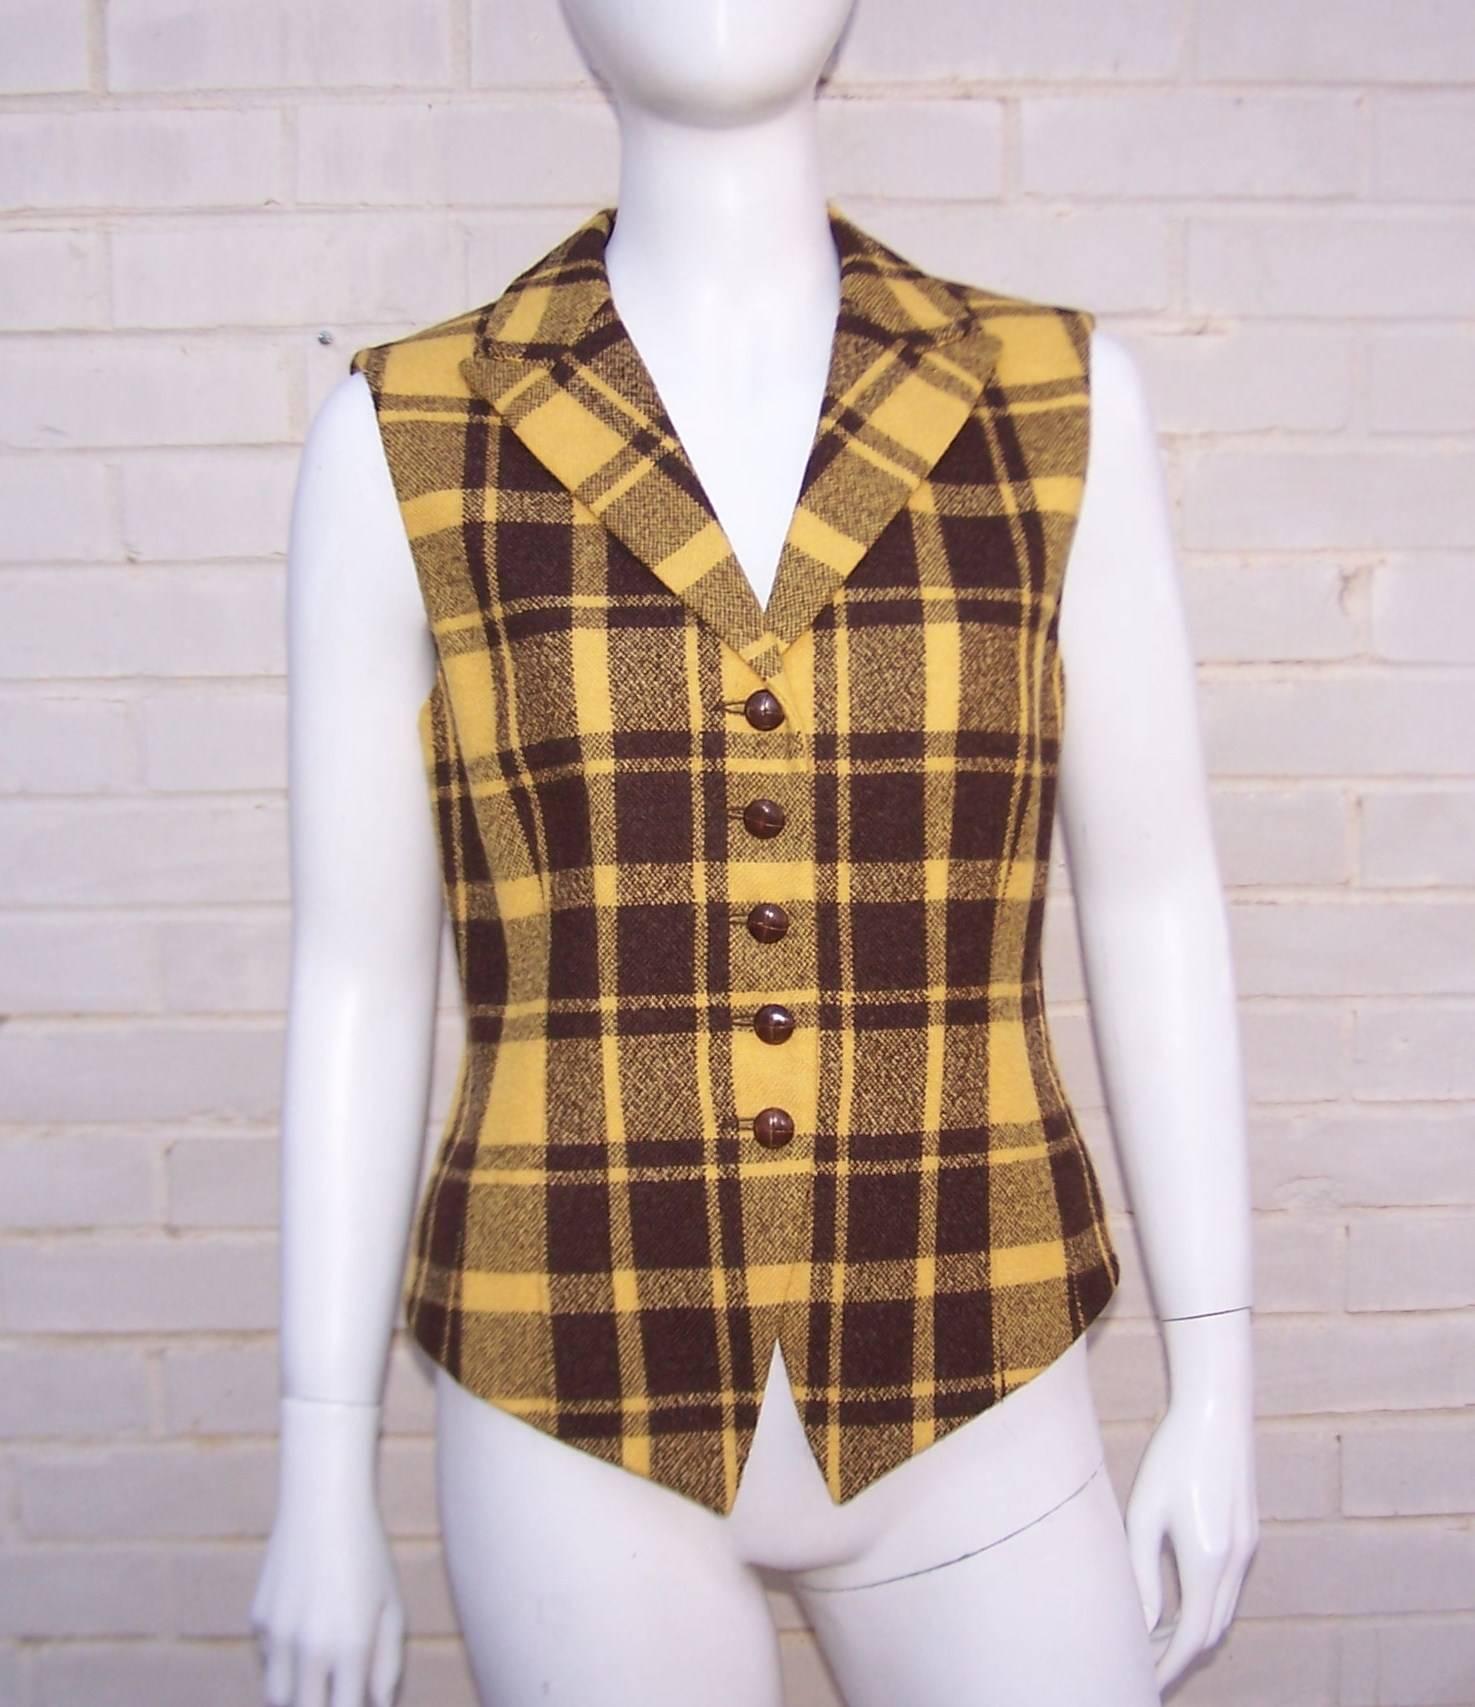 This 1980's Mondi vest is reminiscent of the menswear styles of the late 1800's.  The nipped waist, v-front and vent back give it a decidedly feminine touch.  A tweedy golden yellow and chocolate brown wool plaid mixes well with winter woolens and